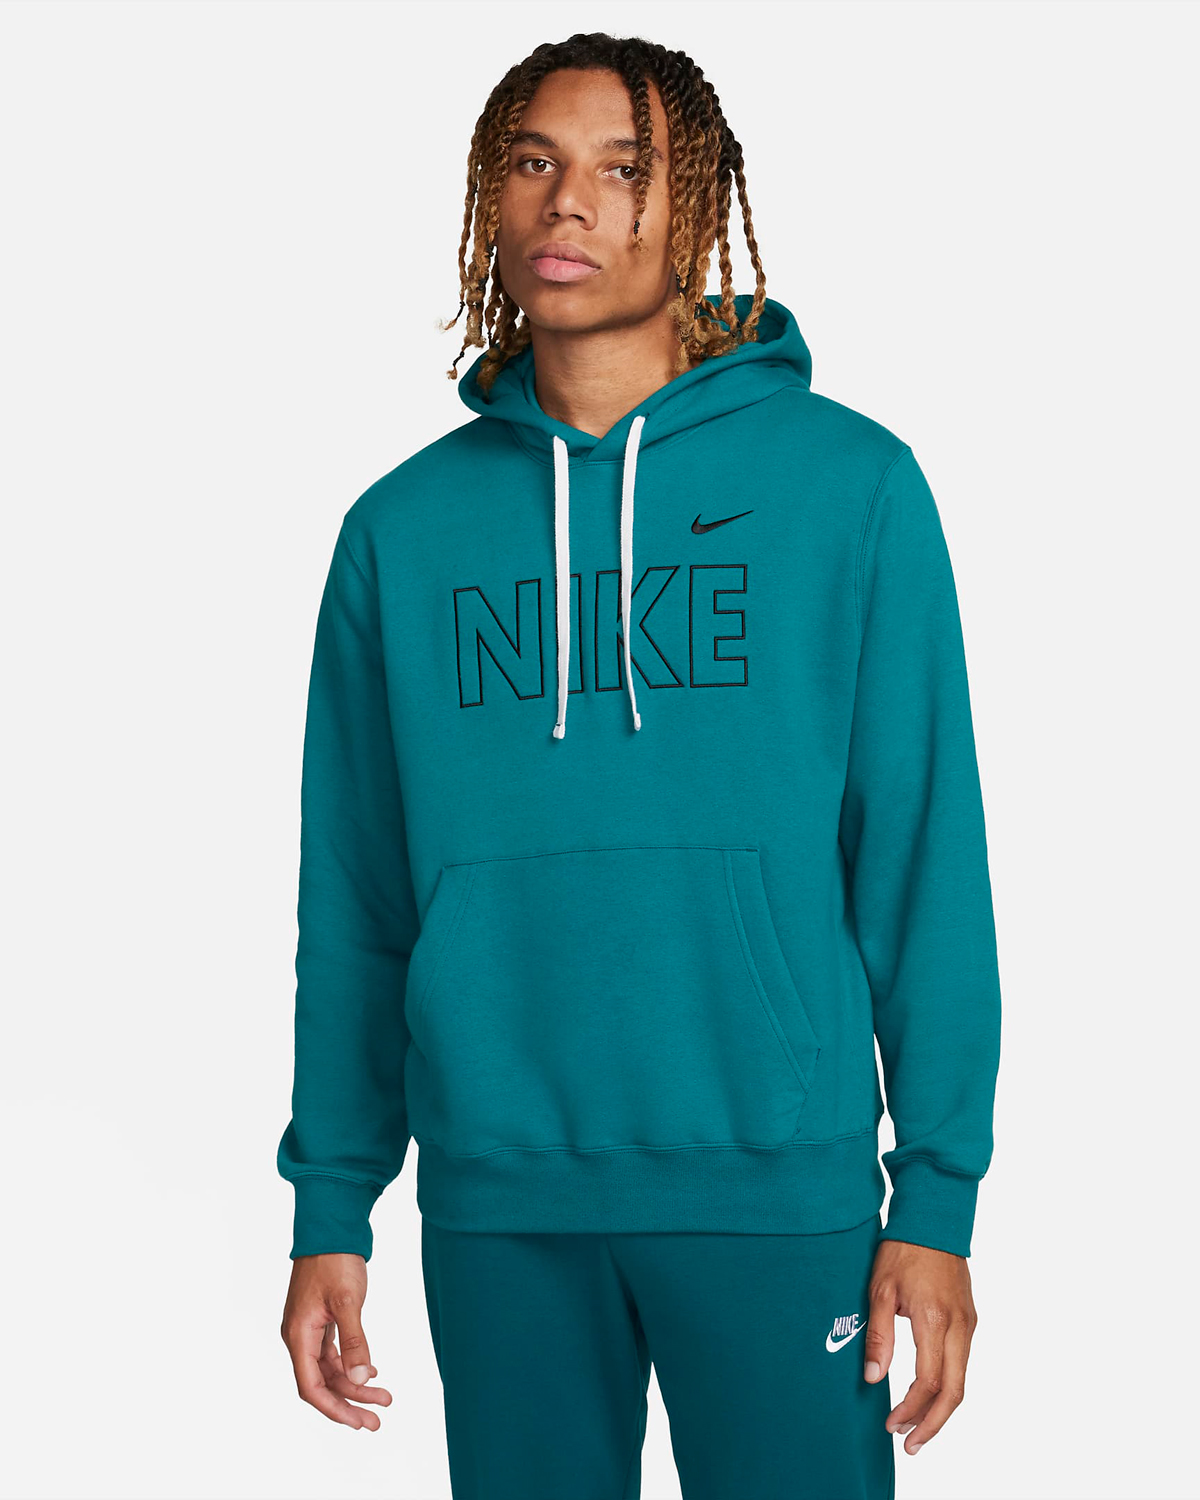 Nike Geode Teal Shirts Shorts Hats Hoodies Pants Outfits